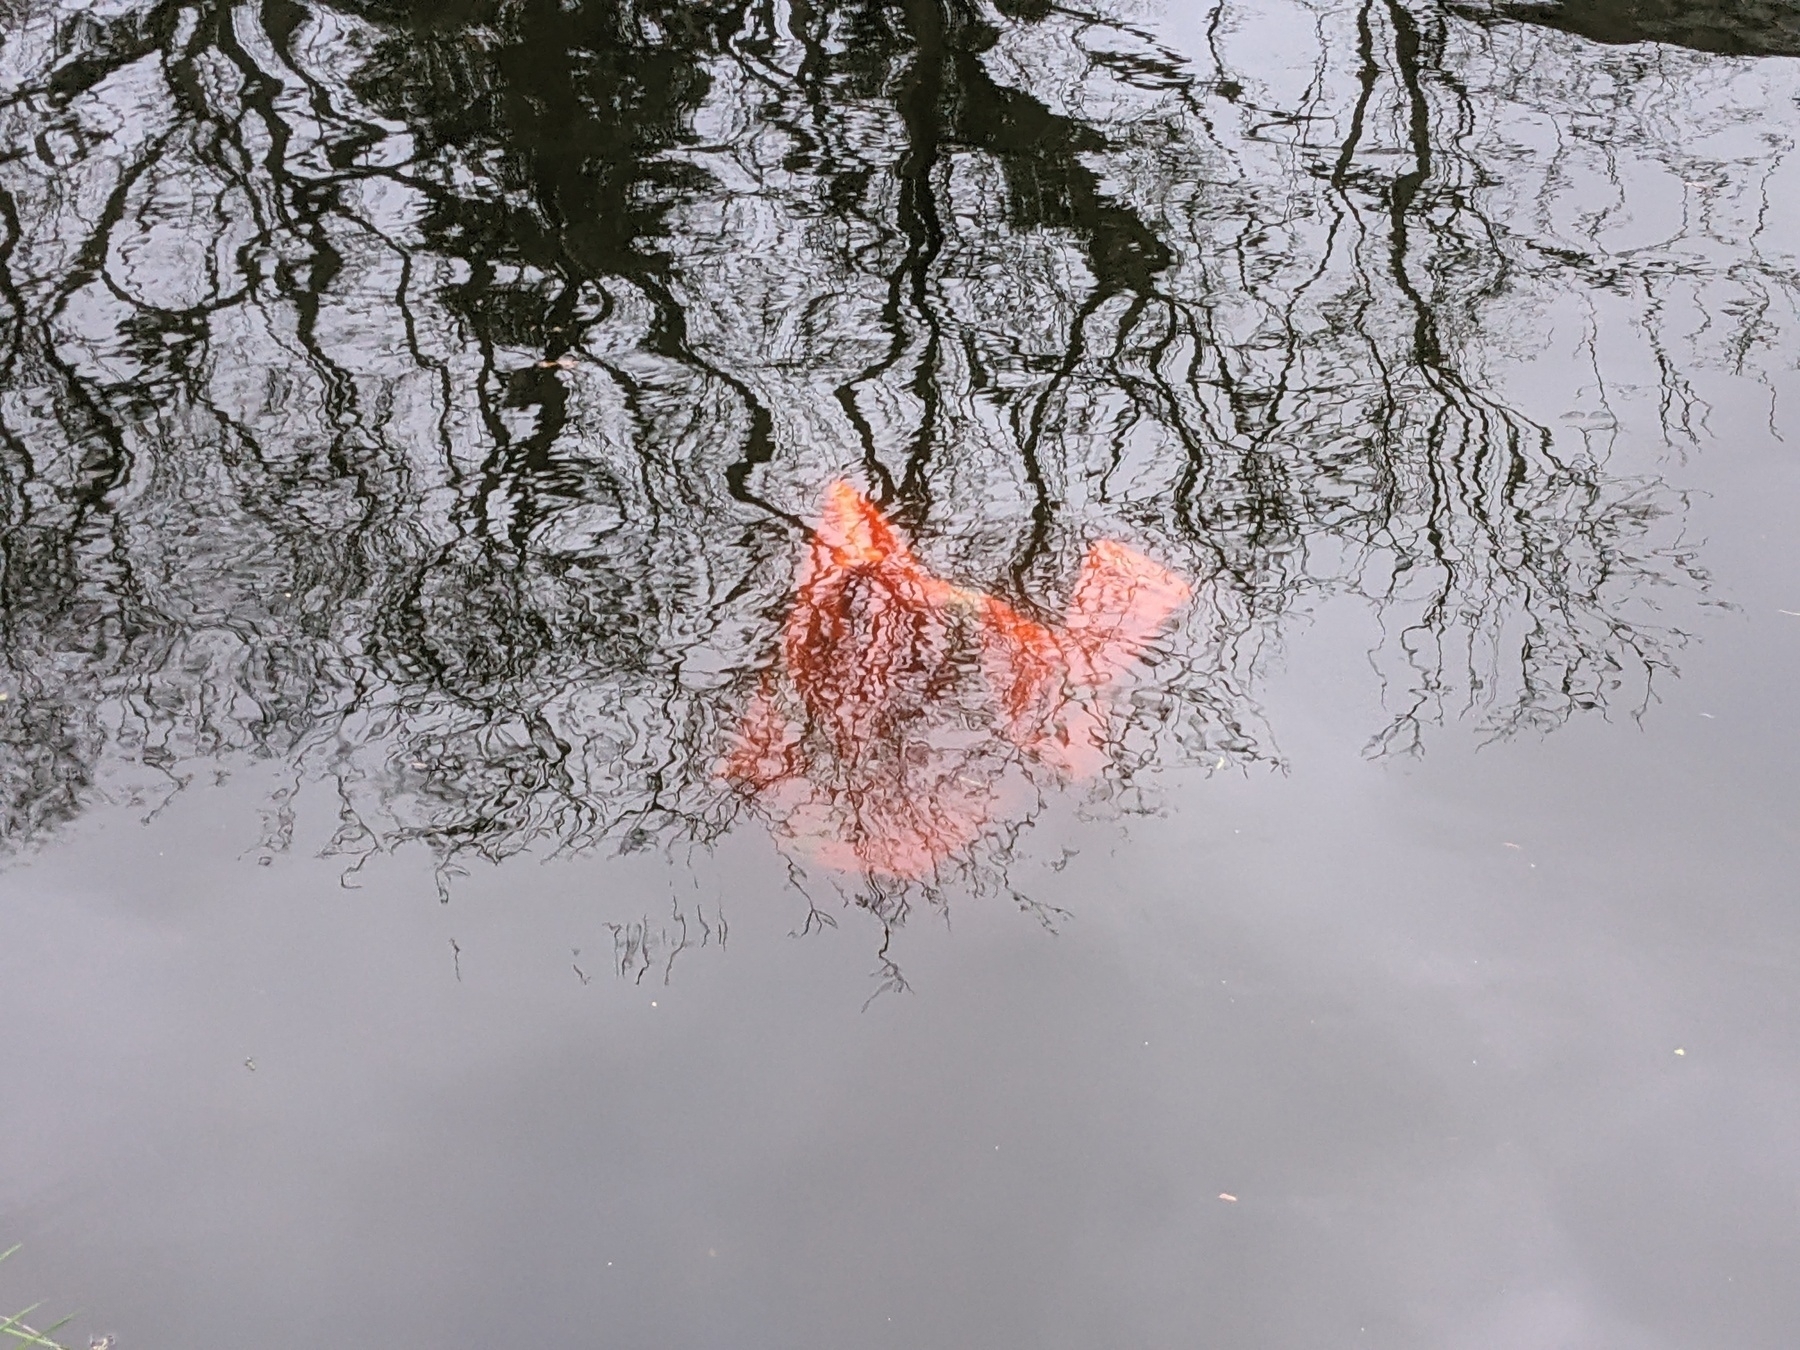 Close up of the orange something in the dark water of the canal - it's a hi-viz work jacket with a hood and arms...